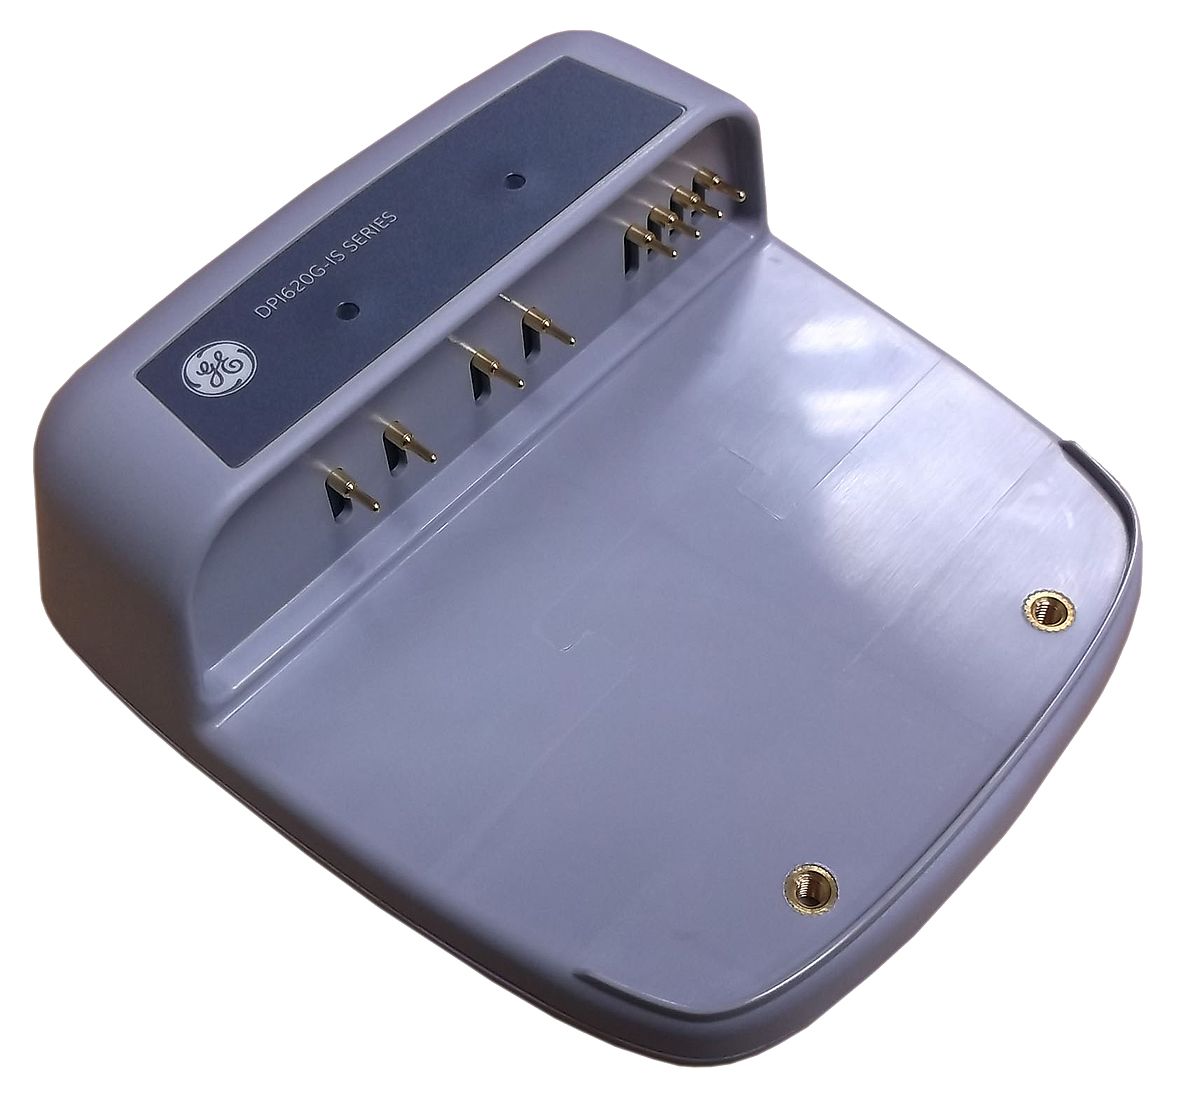 Druck DPI620-IS-CHARGER Battery Charging Station, For Use With DPI 620G-IS Advanced Modular Calibrator